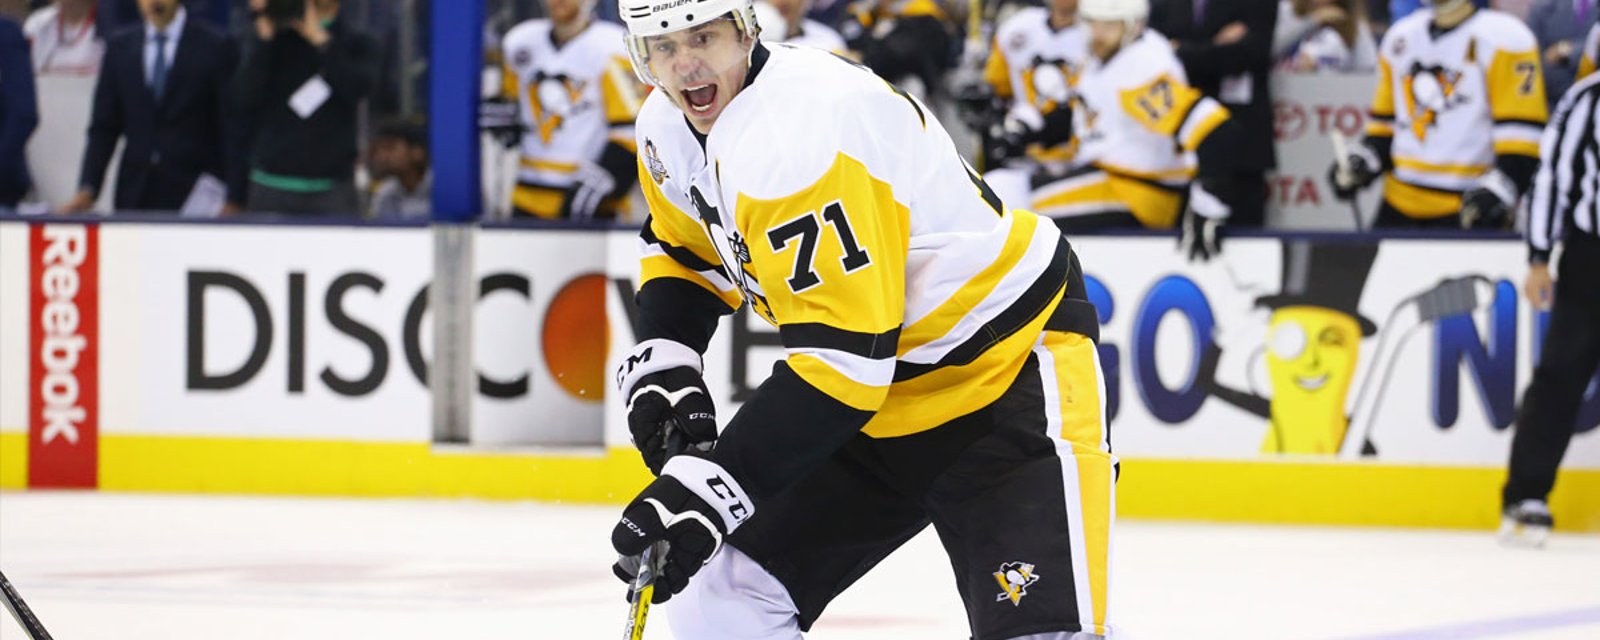 Must see: Evgeni Malkin having a blast with rivals 